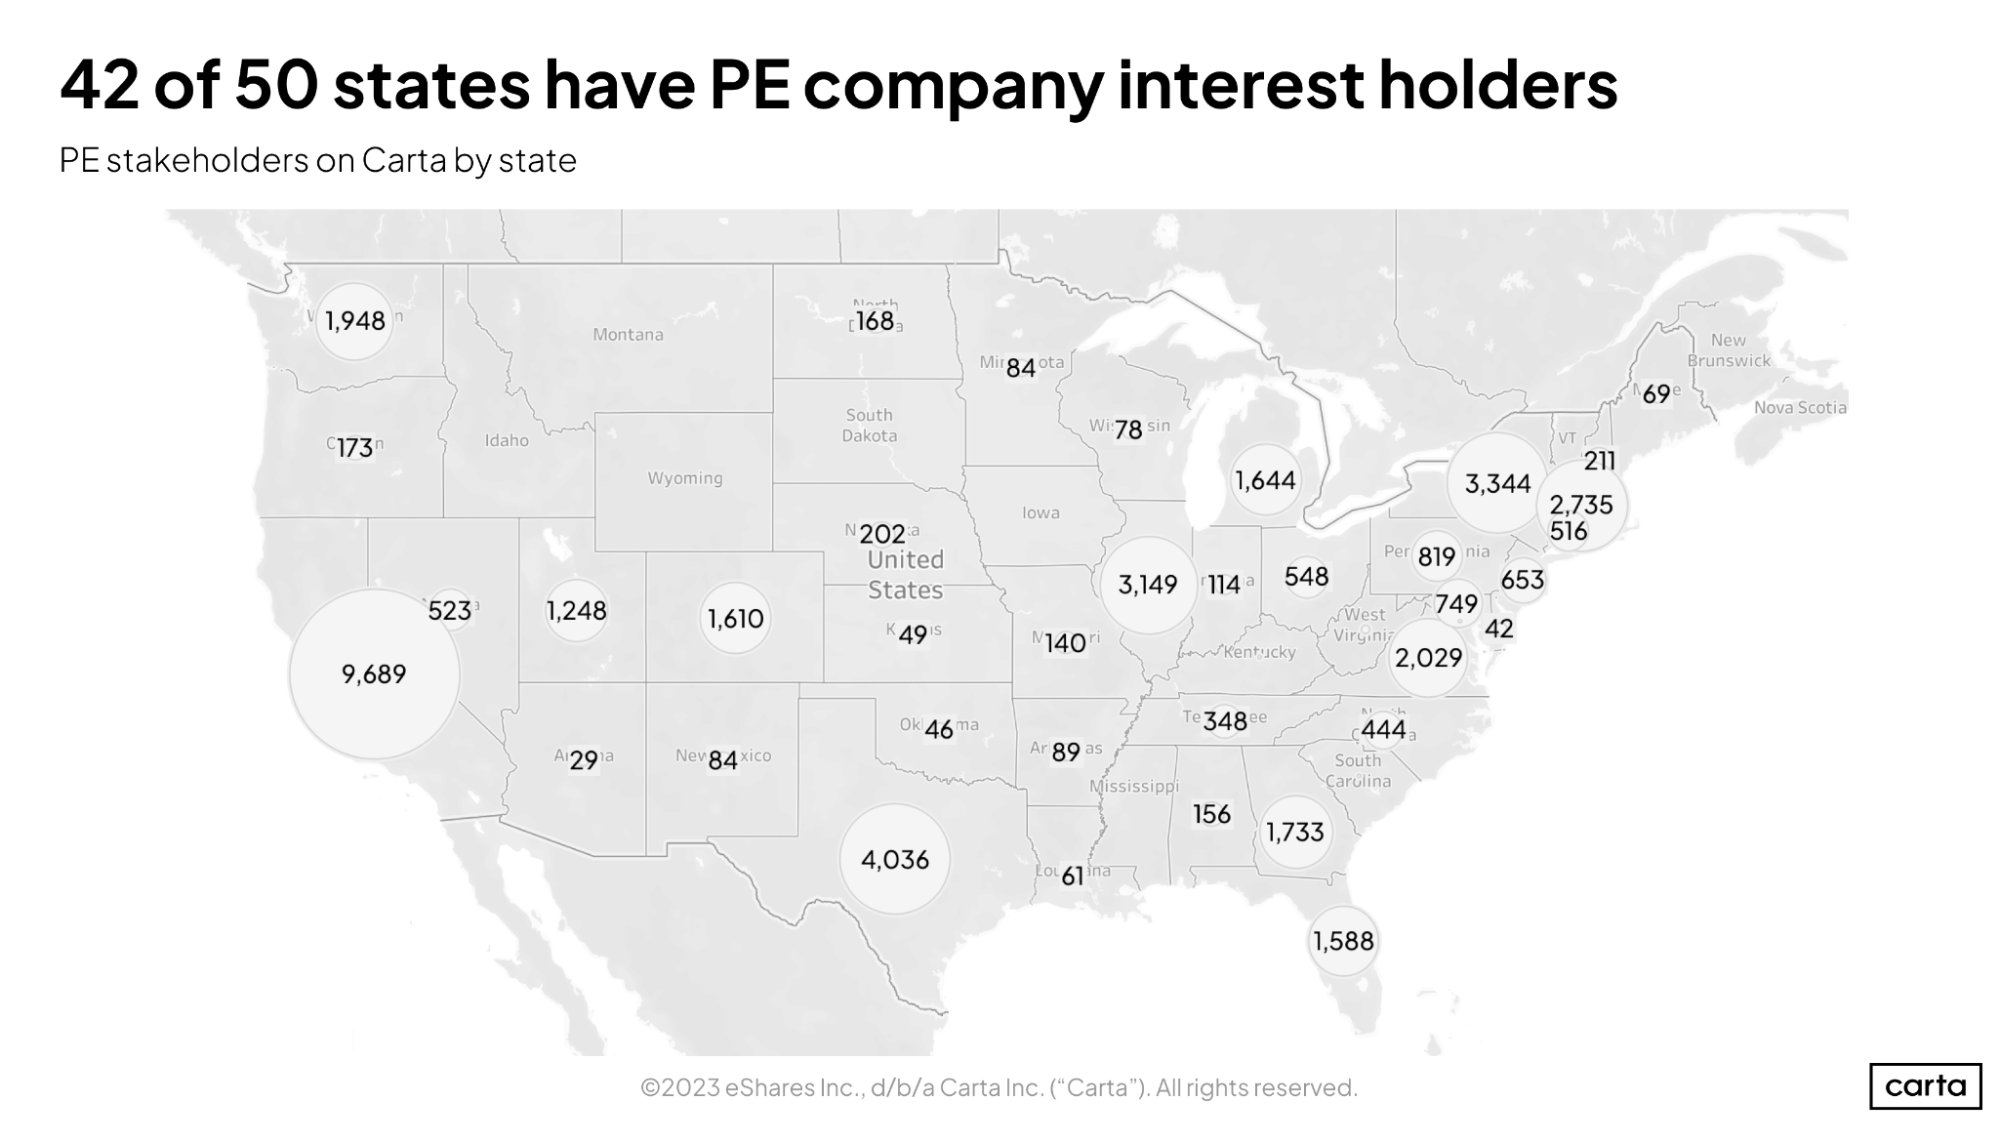 42 of 50 states have PE company interest holders